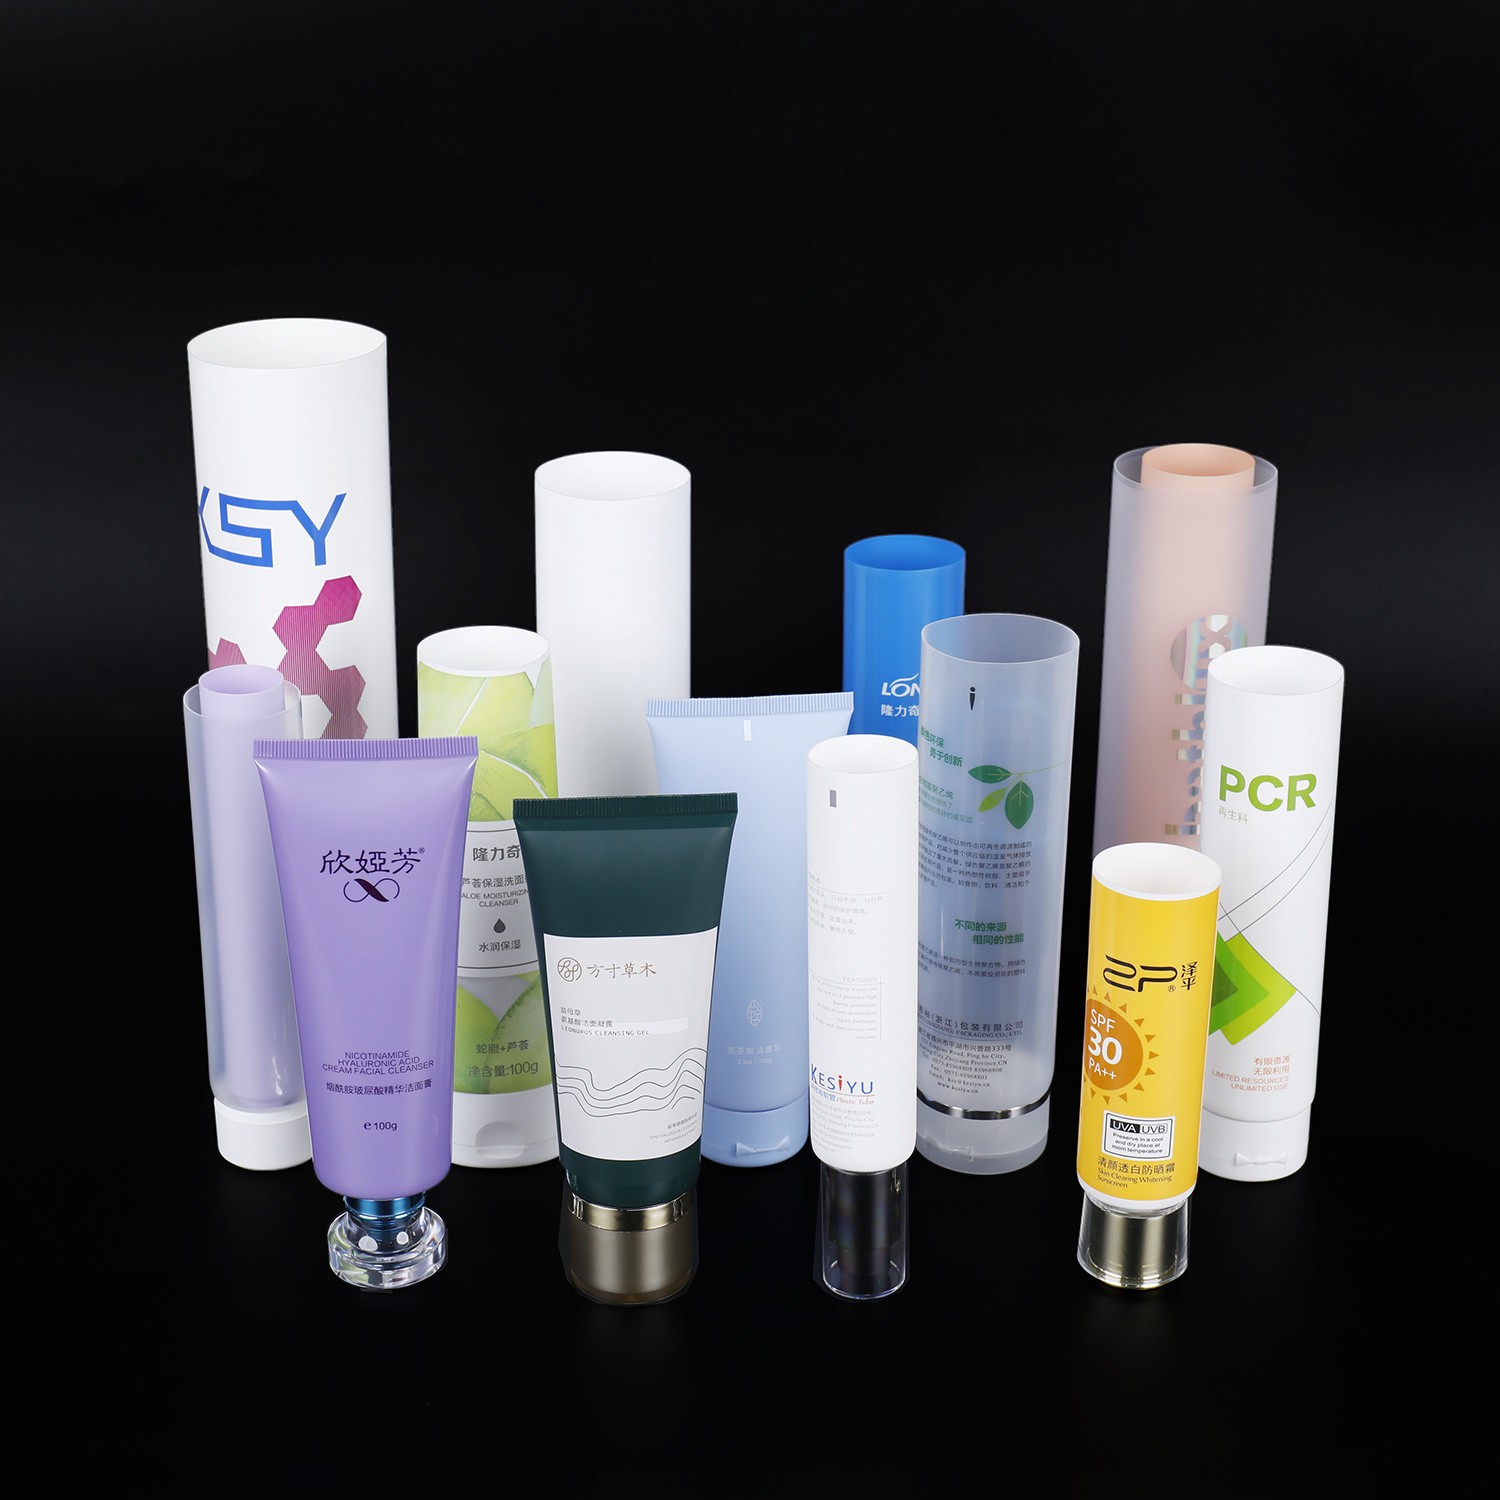 Cosmetic Tube with Offset Printing Packaging Tubes Toothpaste Tube